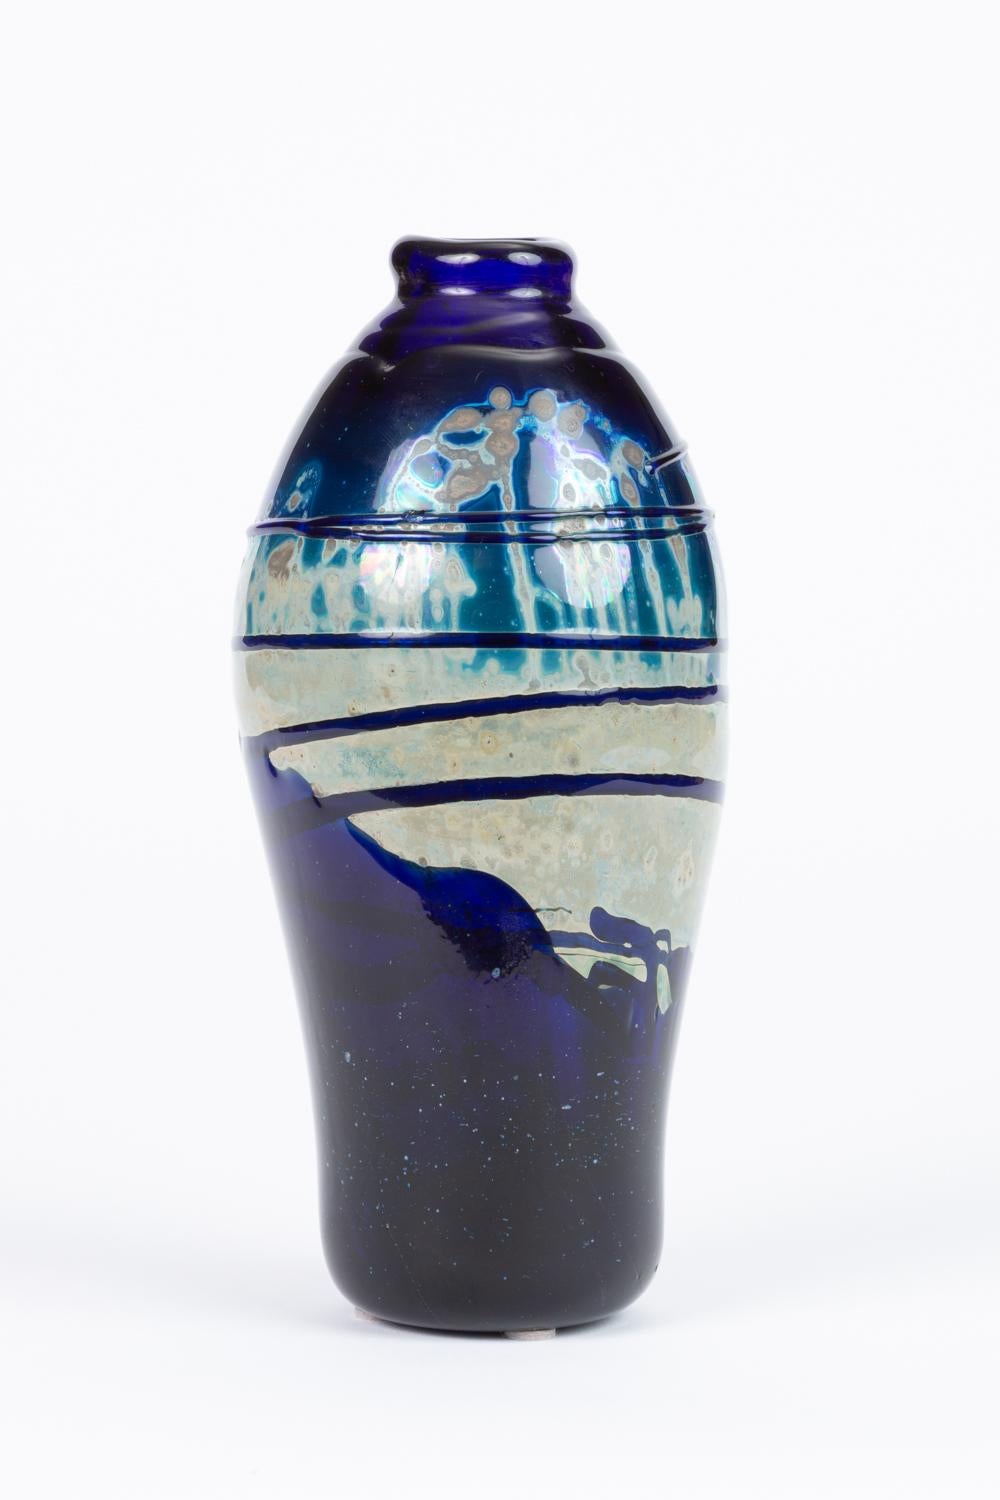 A striking hand blown vase in dark navy blue glass, with a striated drip finish in the center of the piece. Signed by the artist 